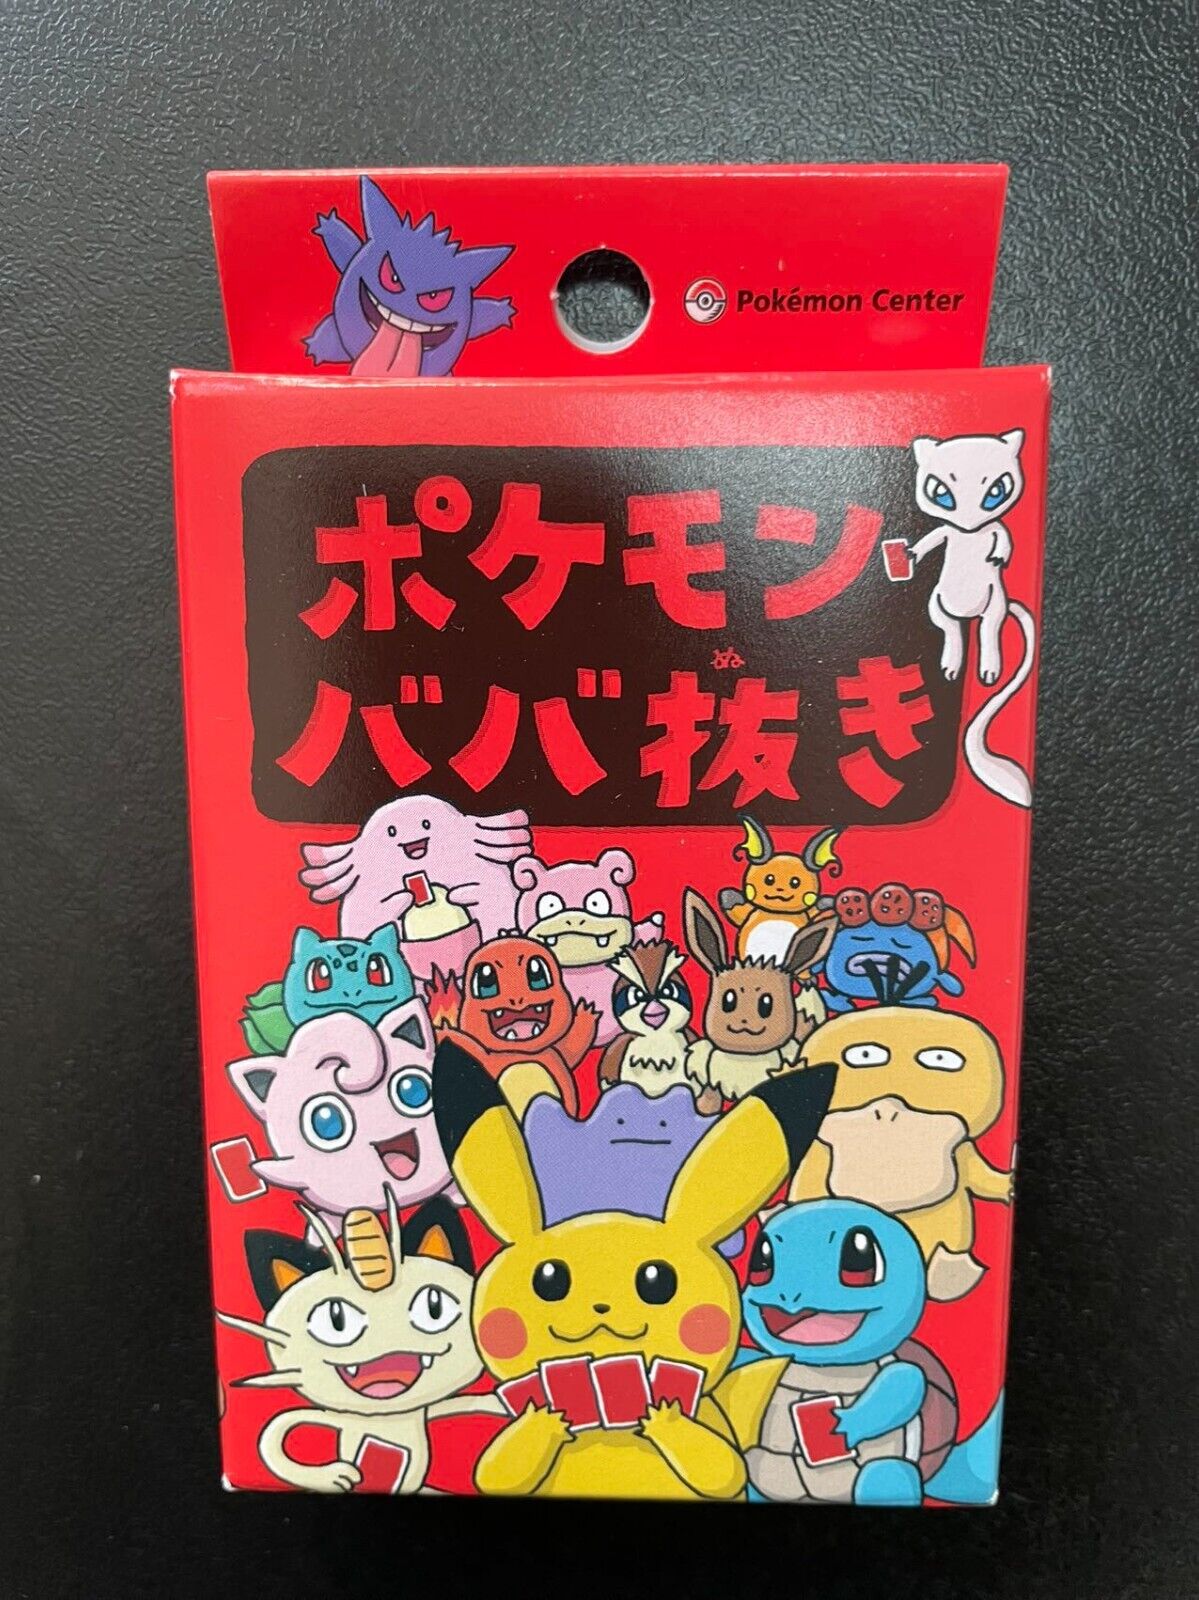 Pokemon old maid card deck playing card pokemon center limited from JP NEW